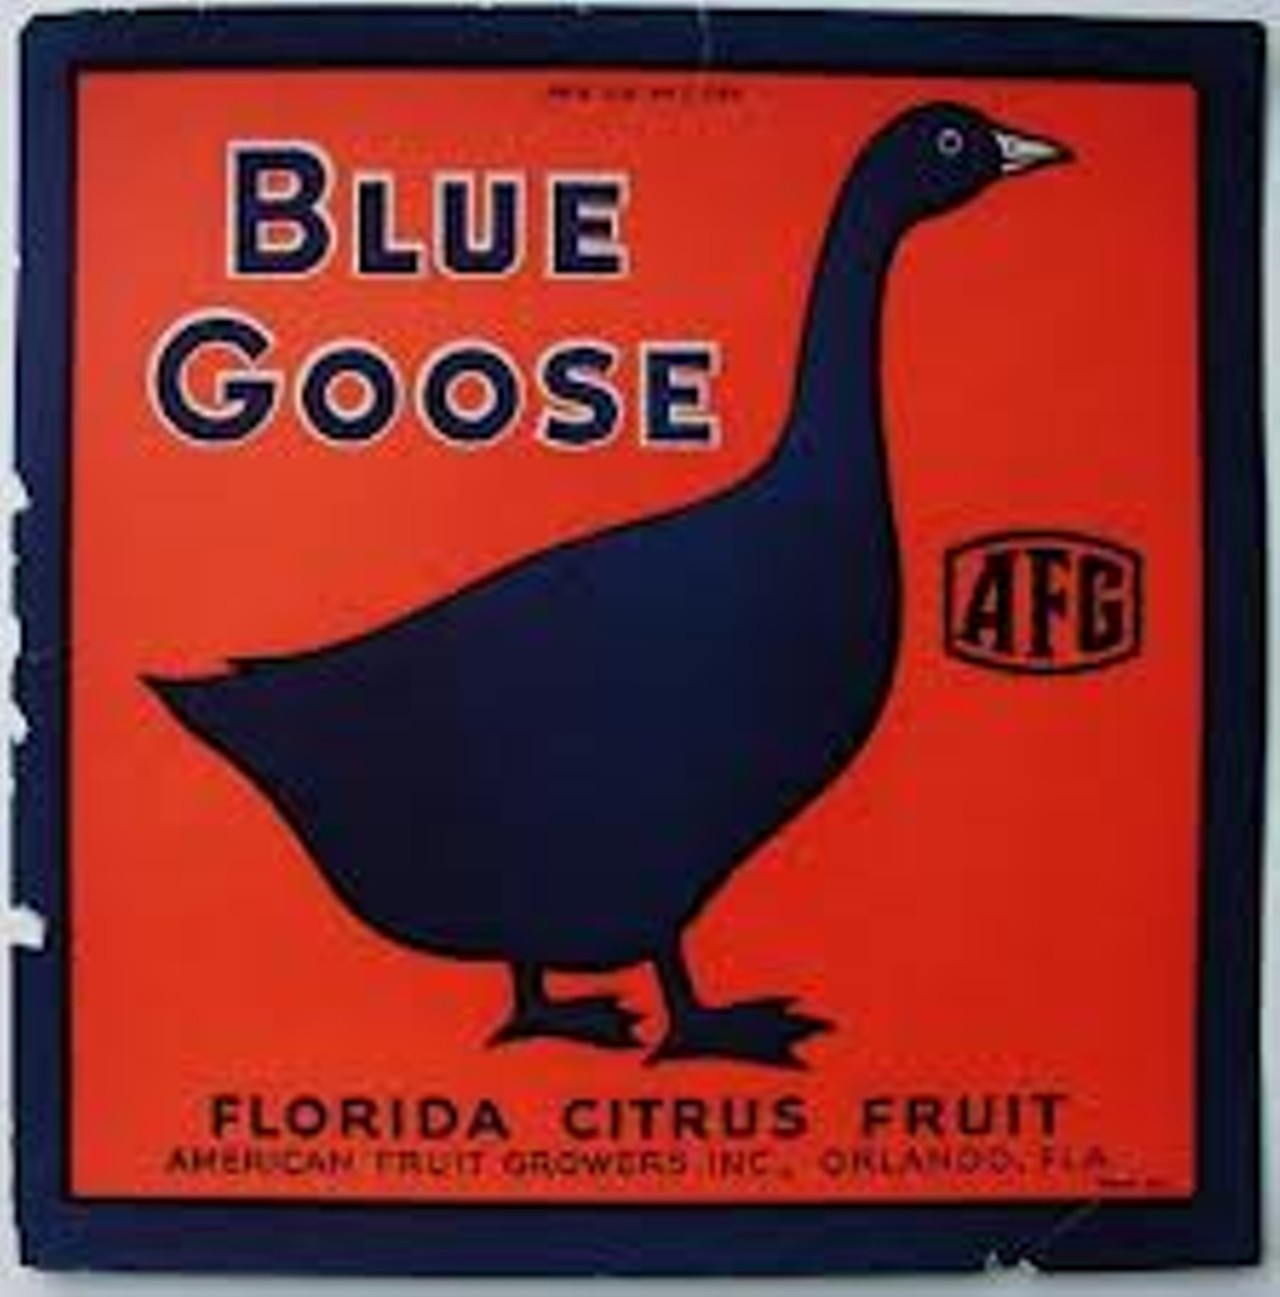 The industry has declined significantly in recent years, but it left behind a really cool legacy: Beautiful labels, pieces of art, that adorned the crates oranges and grapefrults were shipped in. This is a gallery of some of our favorite vintage citrus-crate labels from Central Florida groves. Blue Goose Citrus in Orlando, via thelabelman